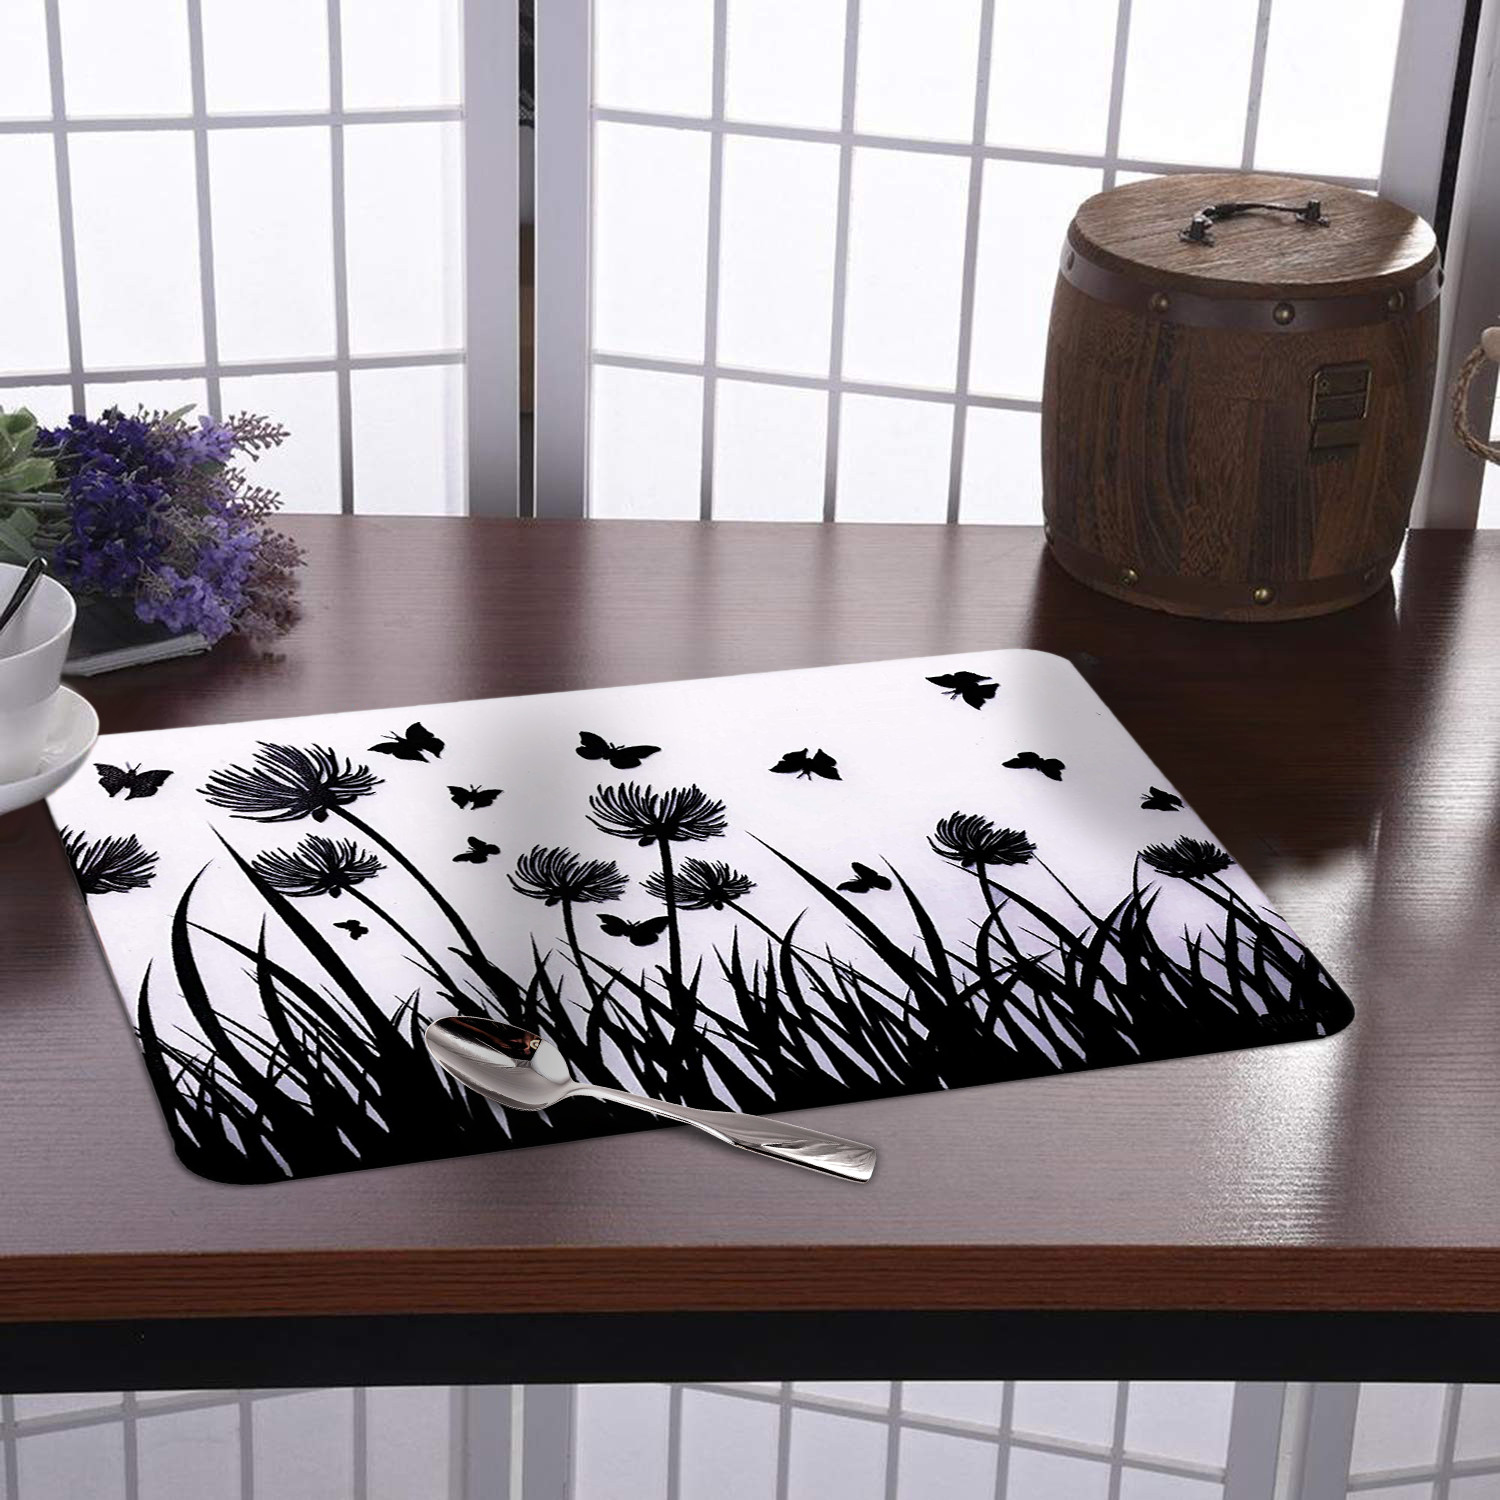 Kuber Industries Multiuses Butterfly Print PVC Table Placemat for kitchen, Dining Table Set of 6 (White)